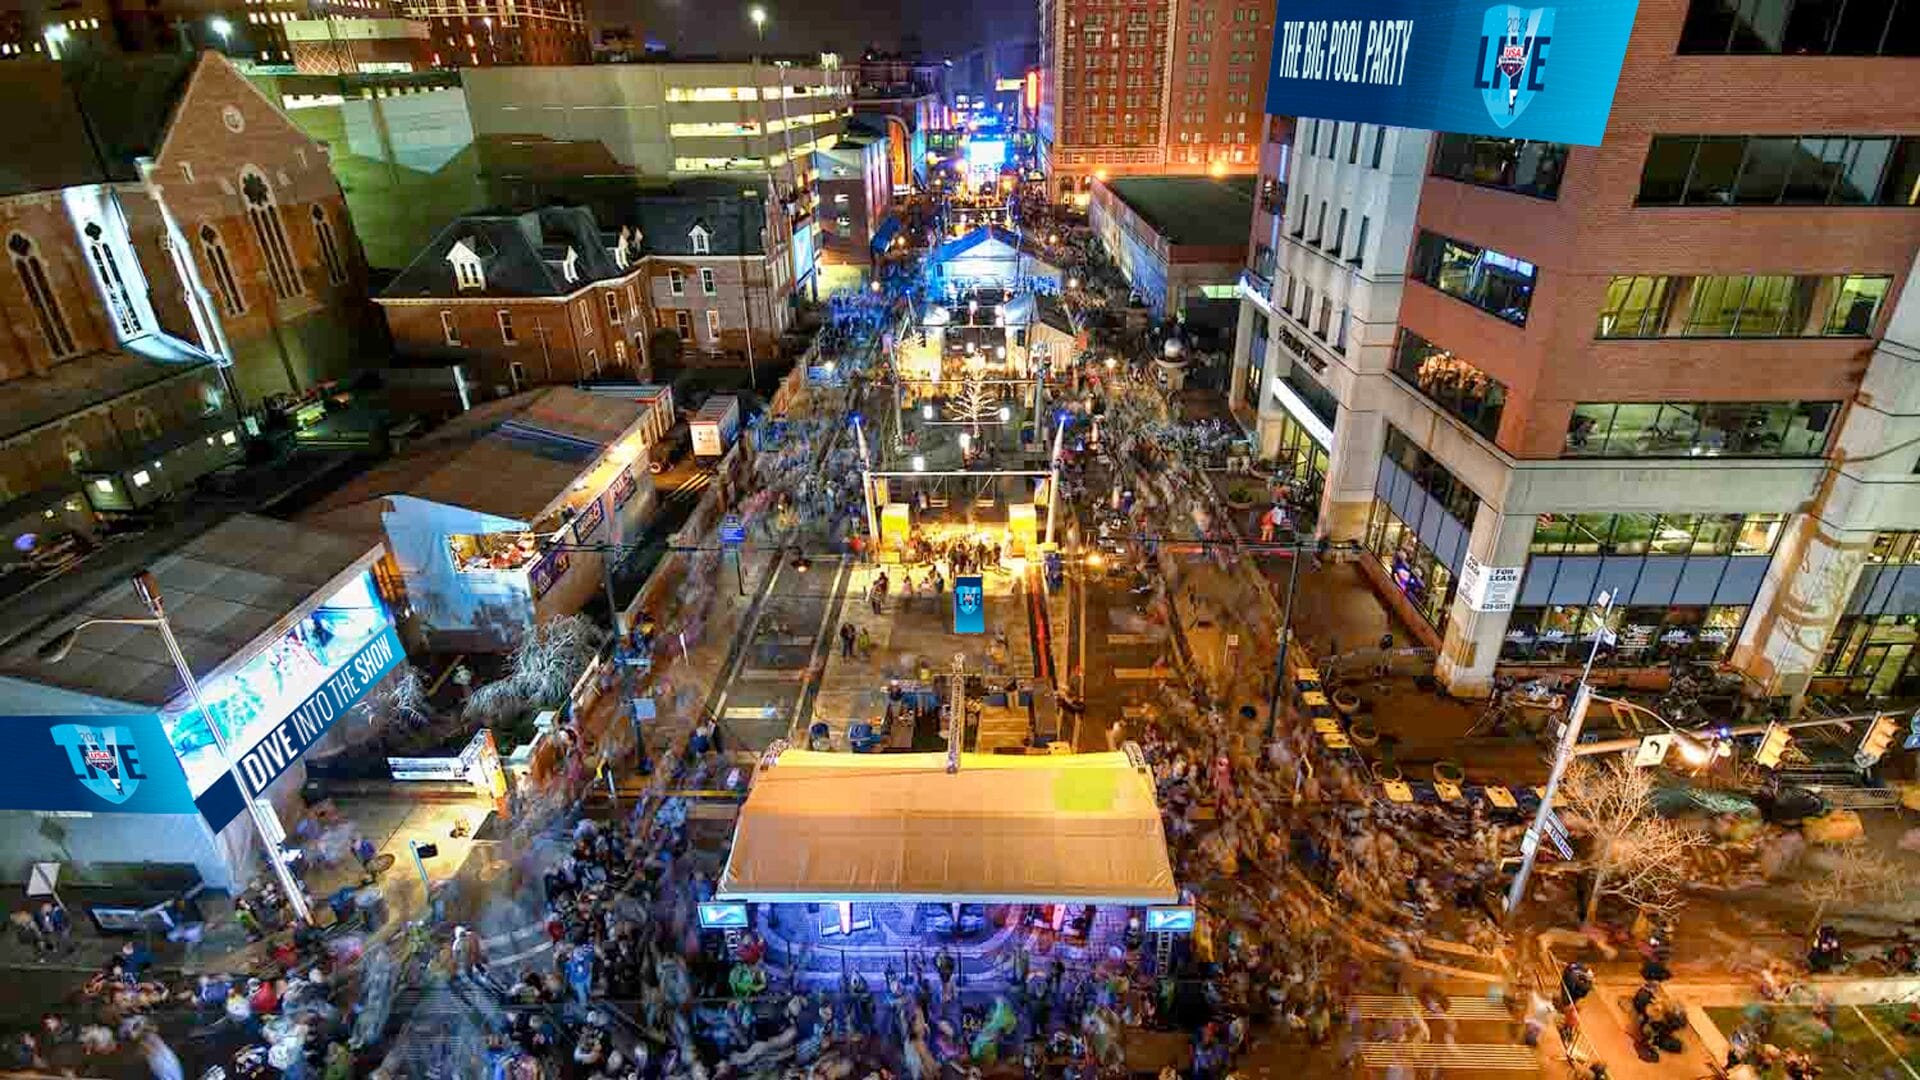 A rendering of USA Swimming LIVE, a free 10-day fan fest on Georgia Street to celebrate the U.S. Olympic swimming trials at Lucas Oil Stadium. (Provided Photo/USA Swimming)